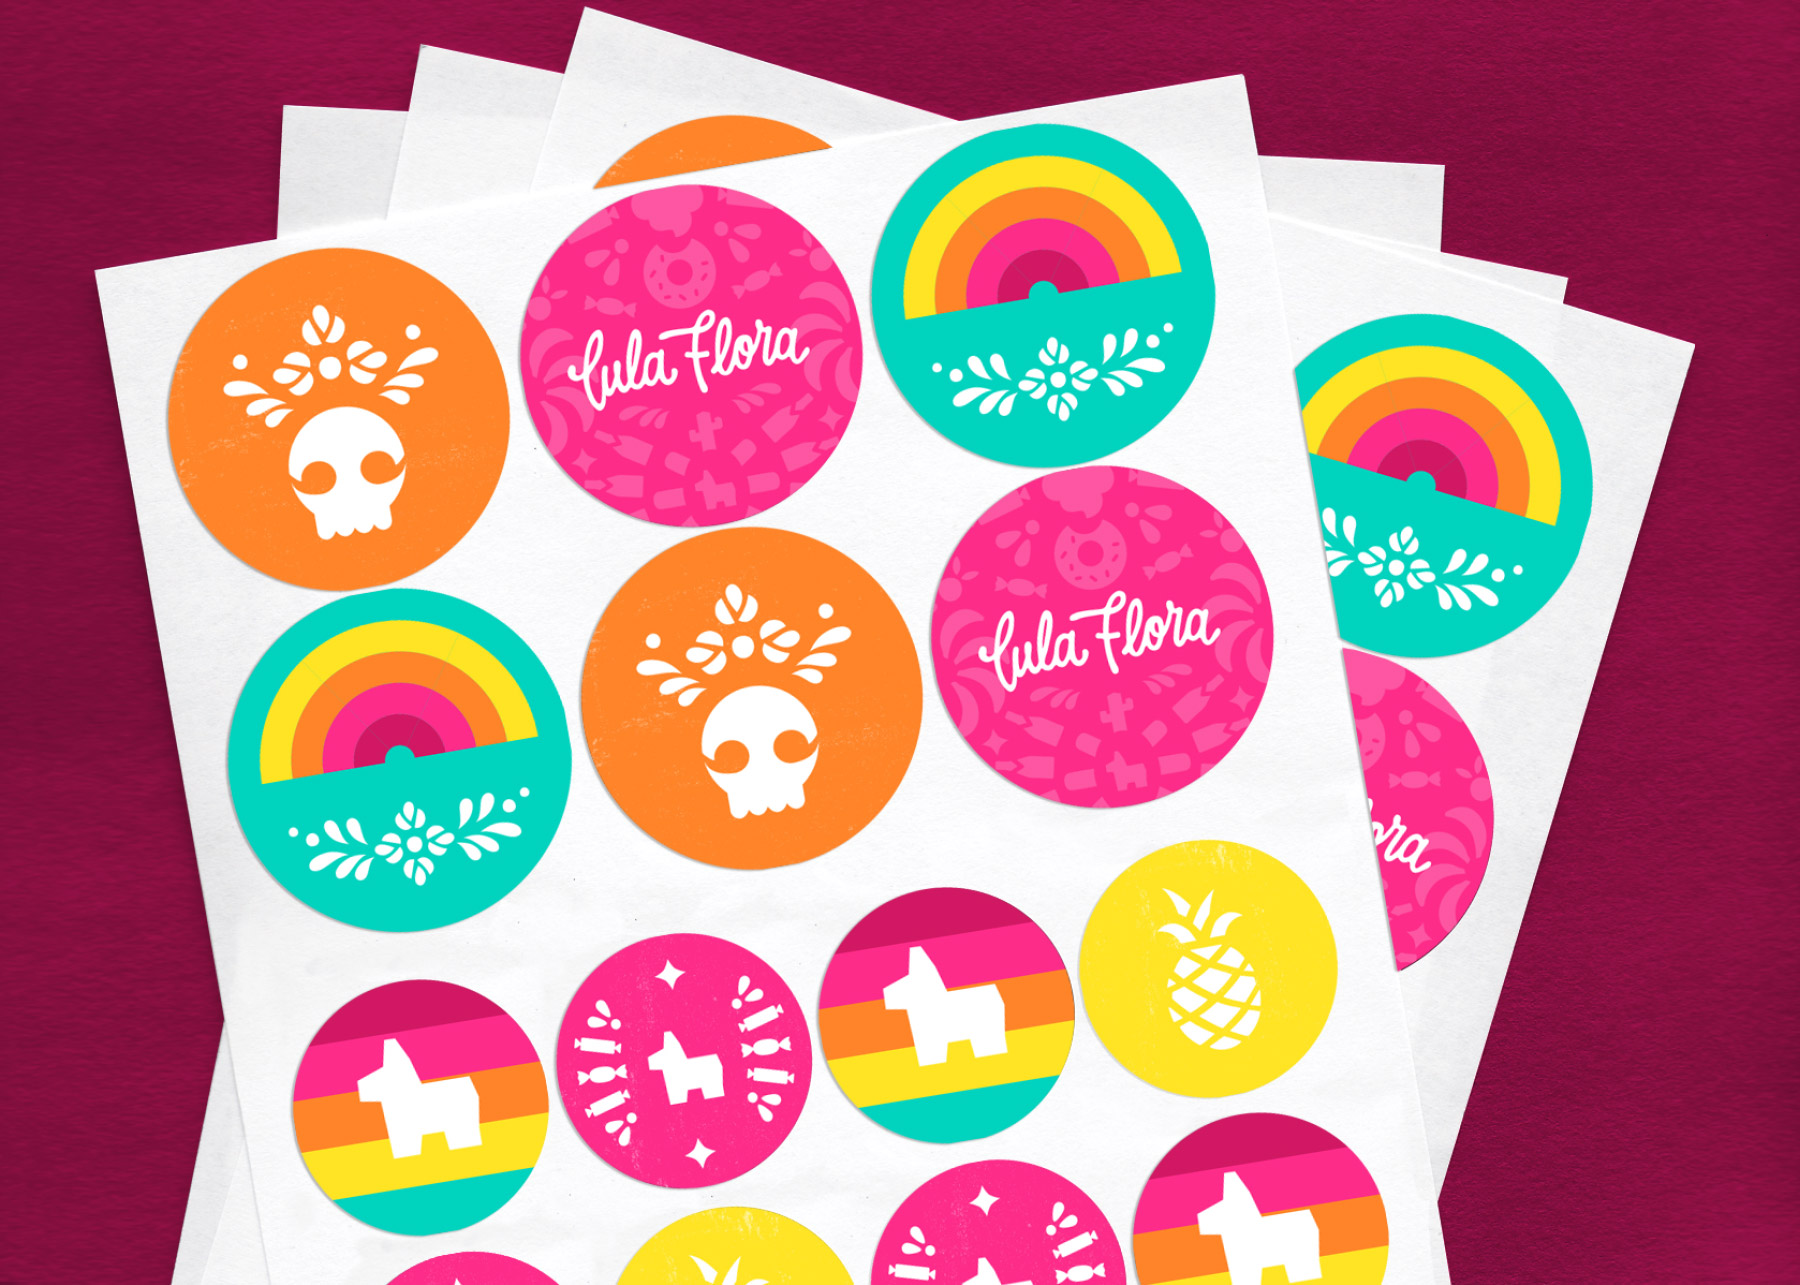 Packaging stickers with icons of candy, piñatas, and other fiesta elements